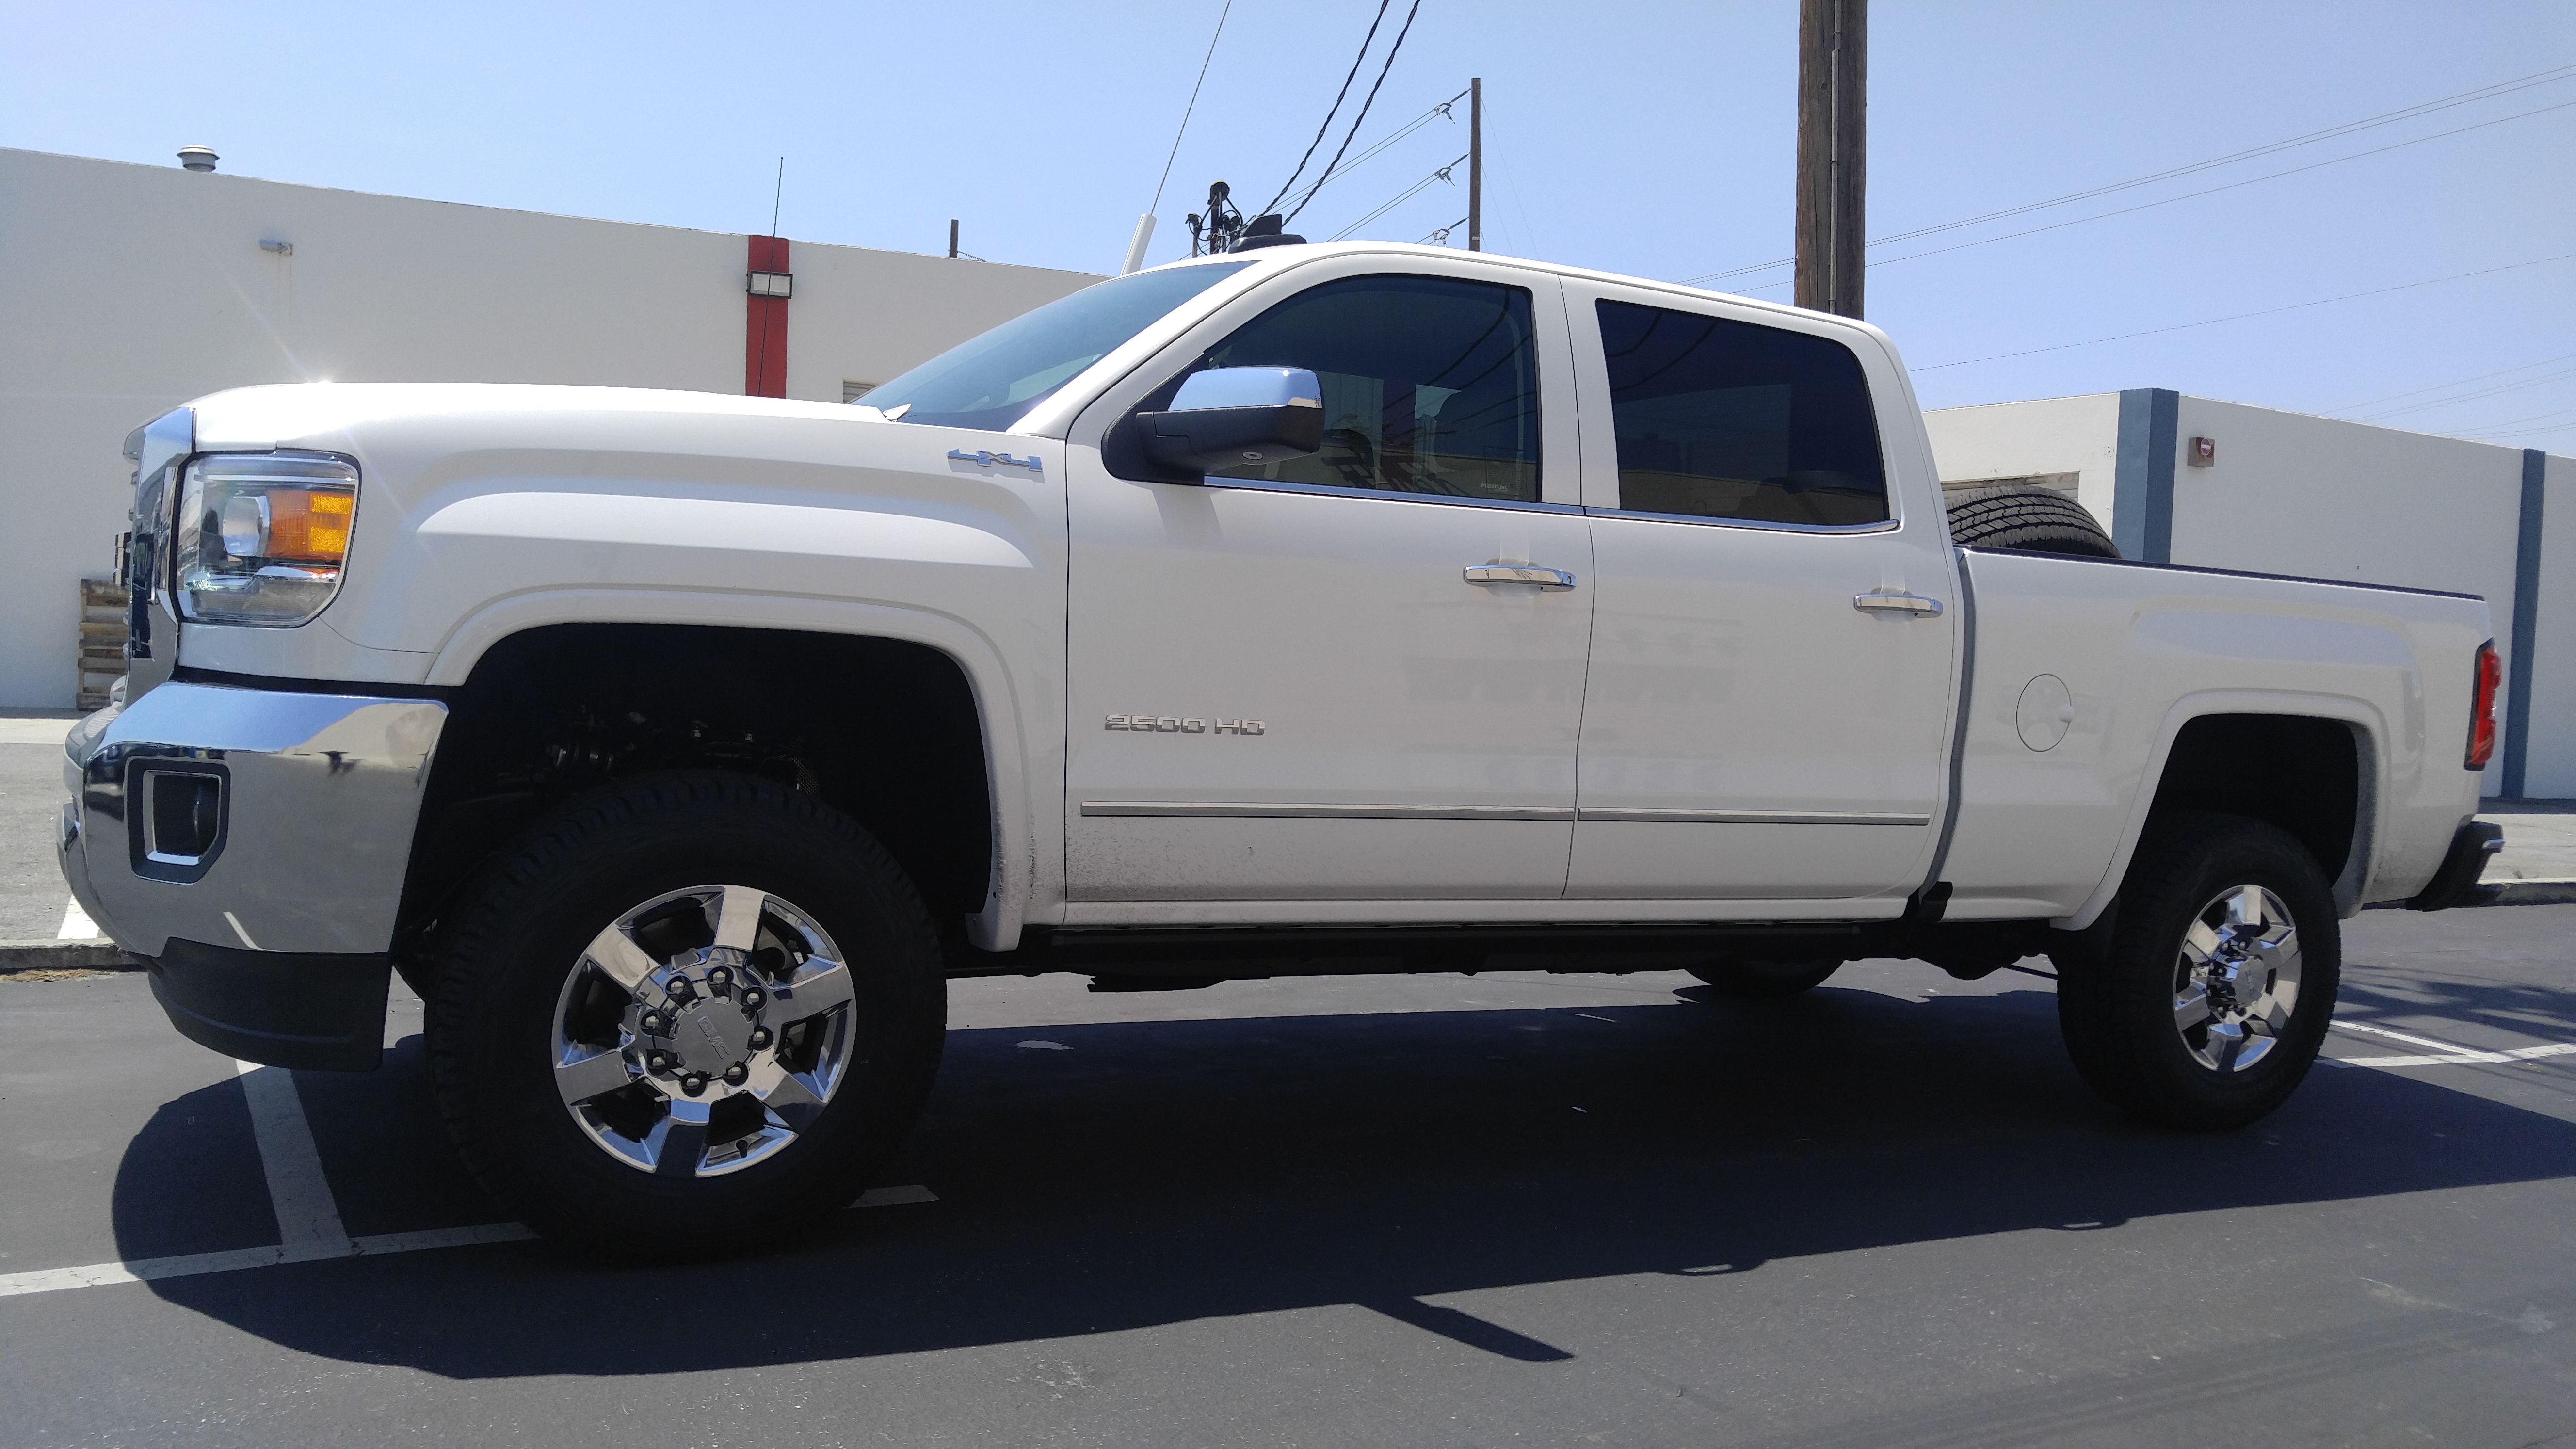 2016 GMC 2500 HD 25" Leveling Kit, 275/70 R18 Cooper Tires(33.5"tall), Stock 18" Rims, Amp Research Power Step